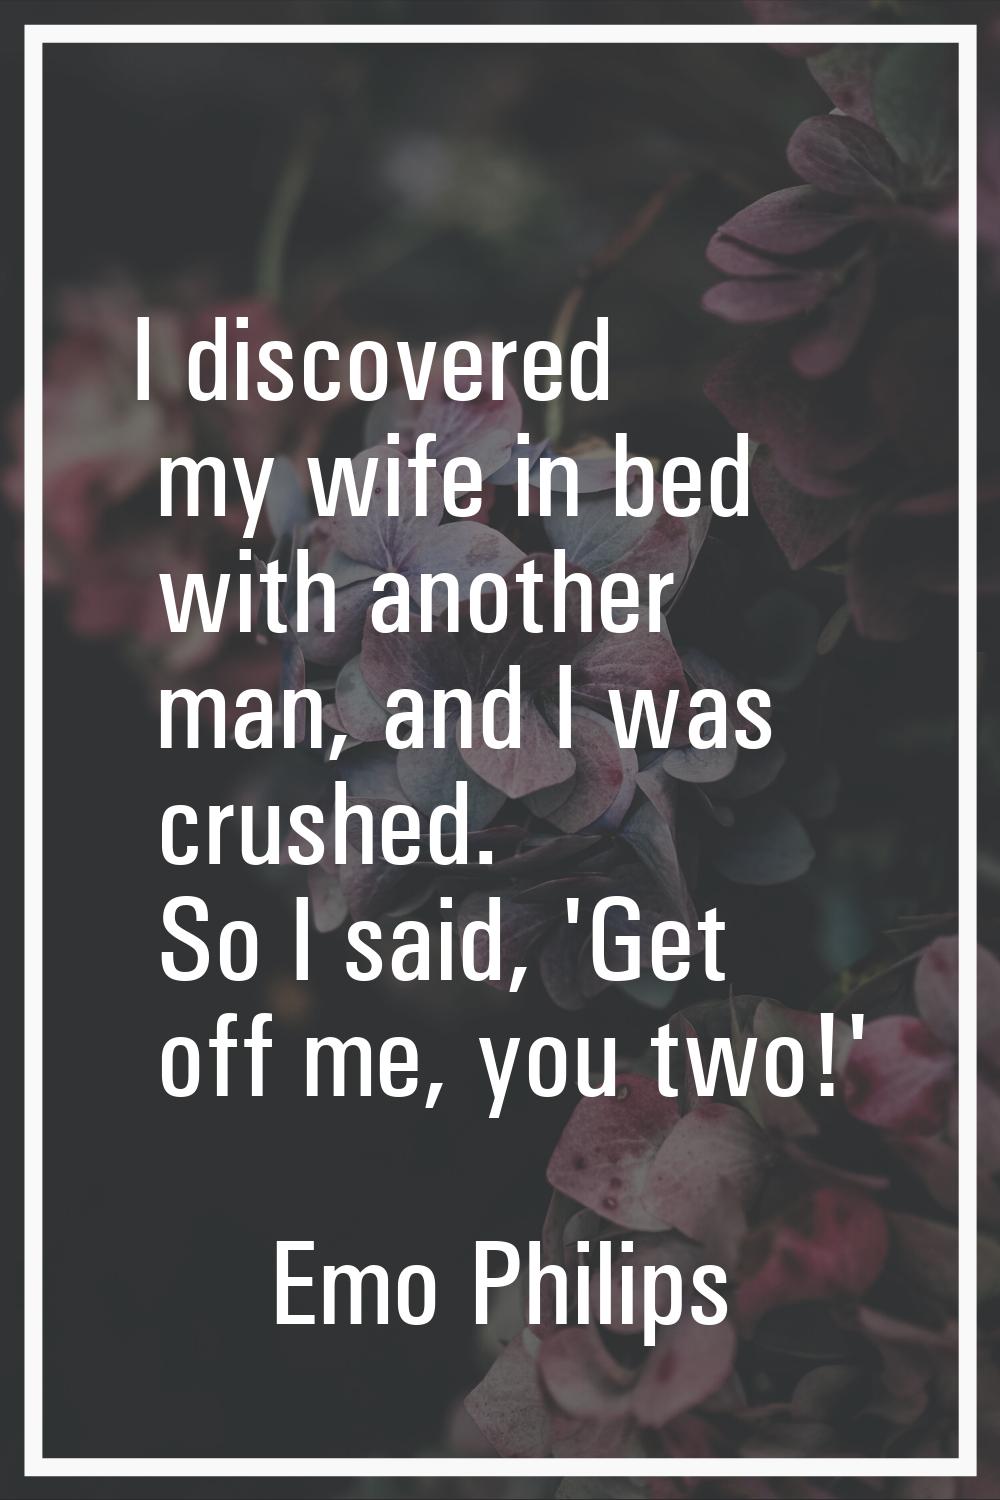 I discovered my wife in bed with another man, and I was crushed. So I said, 'Get off me, you two!'